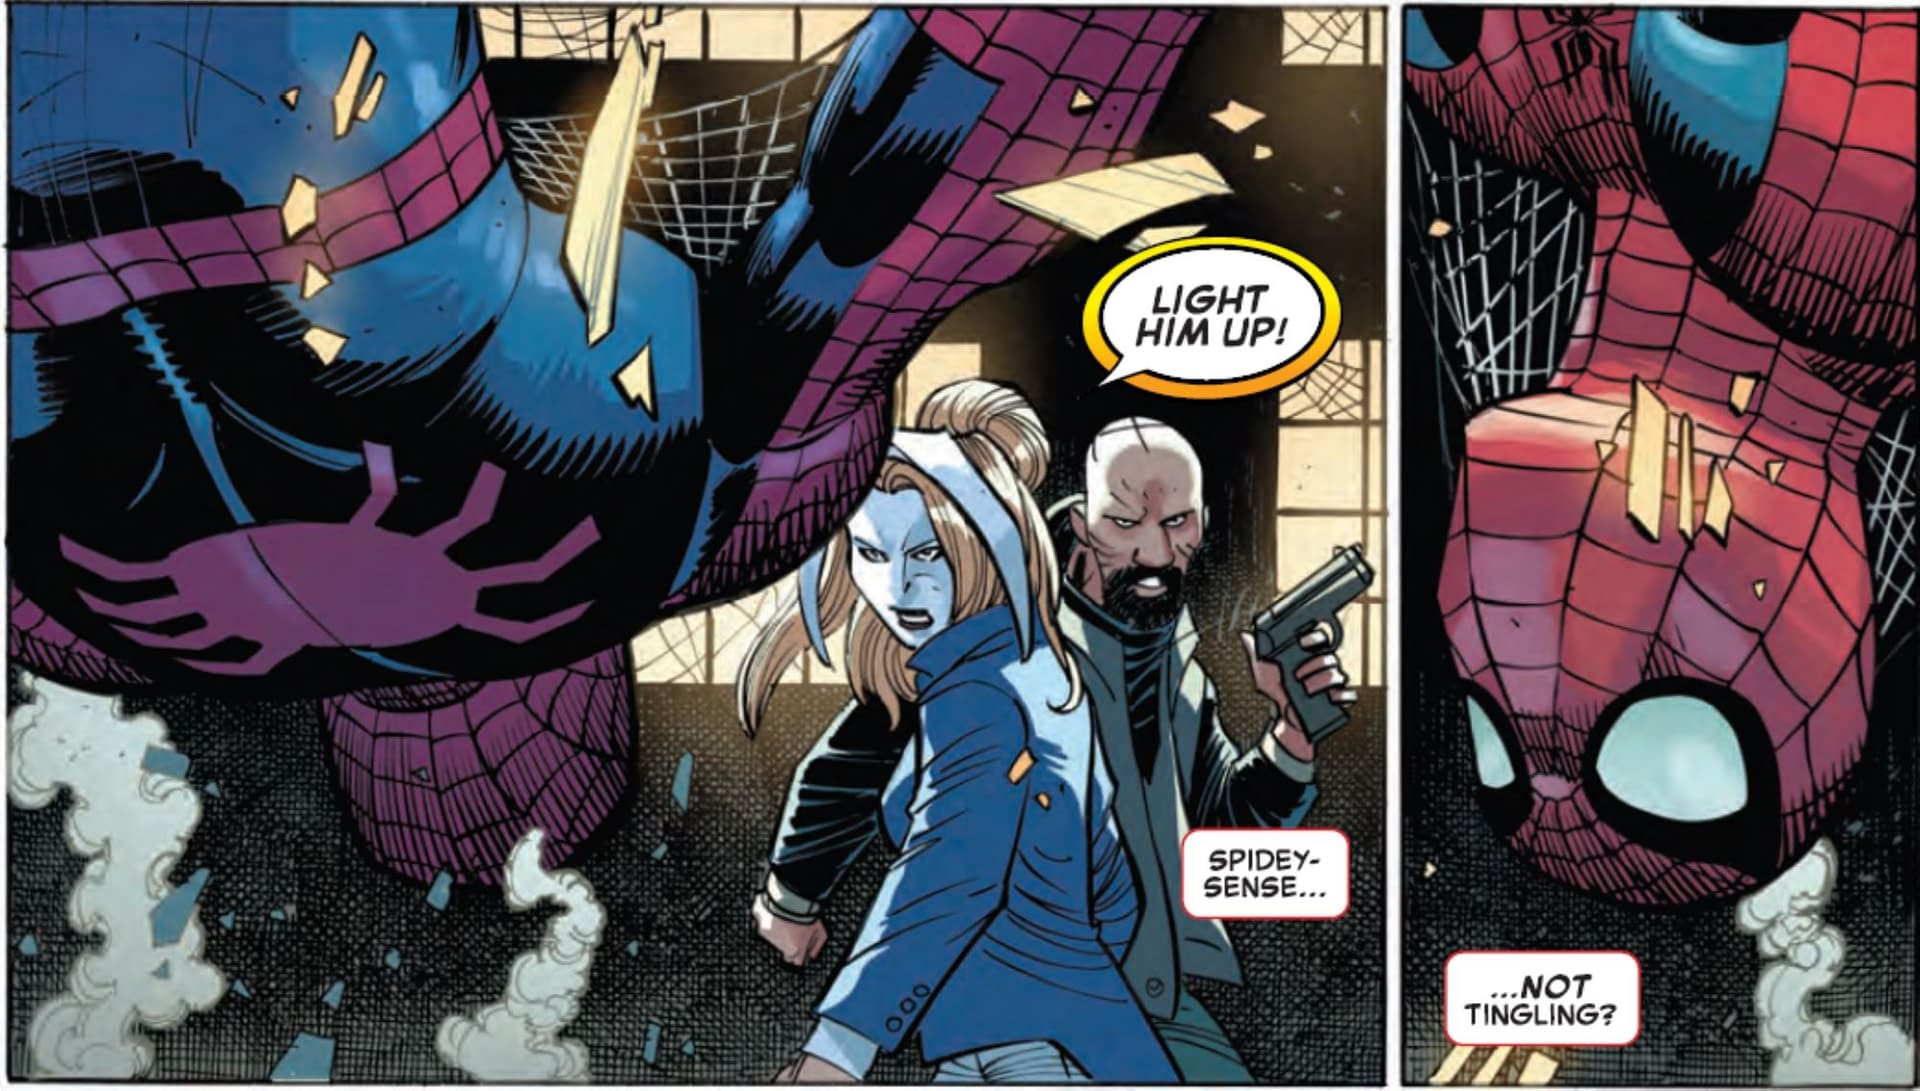 Amazing Spider-Man #2 Tops Bestseller List Even Without Mary Jane